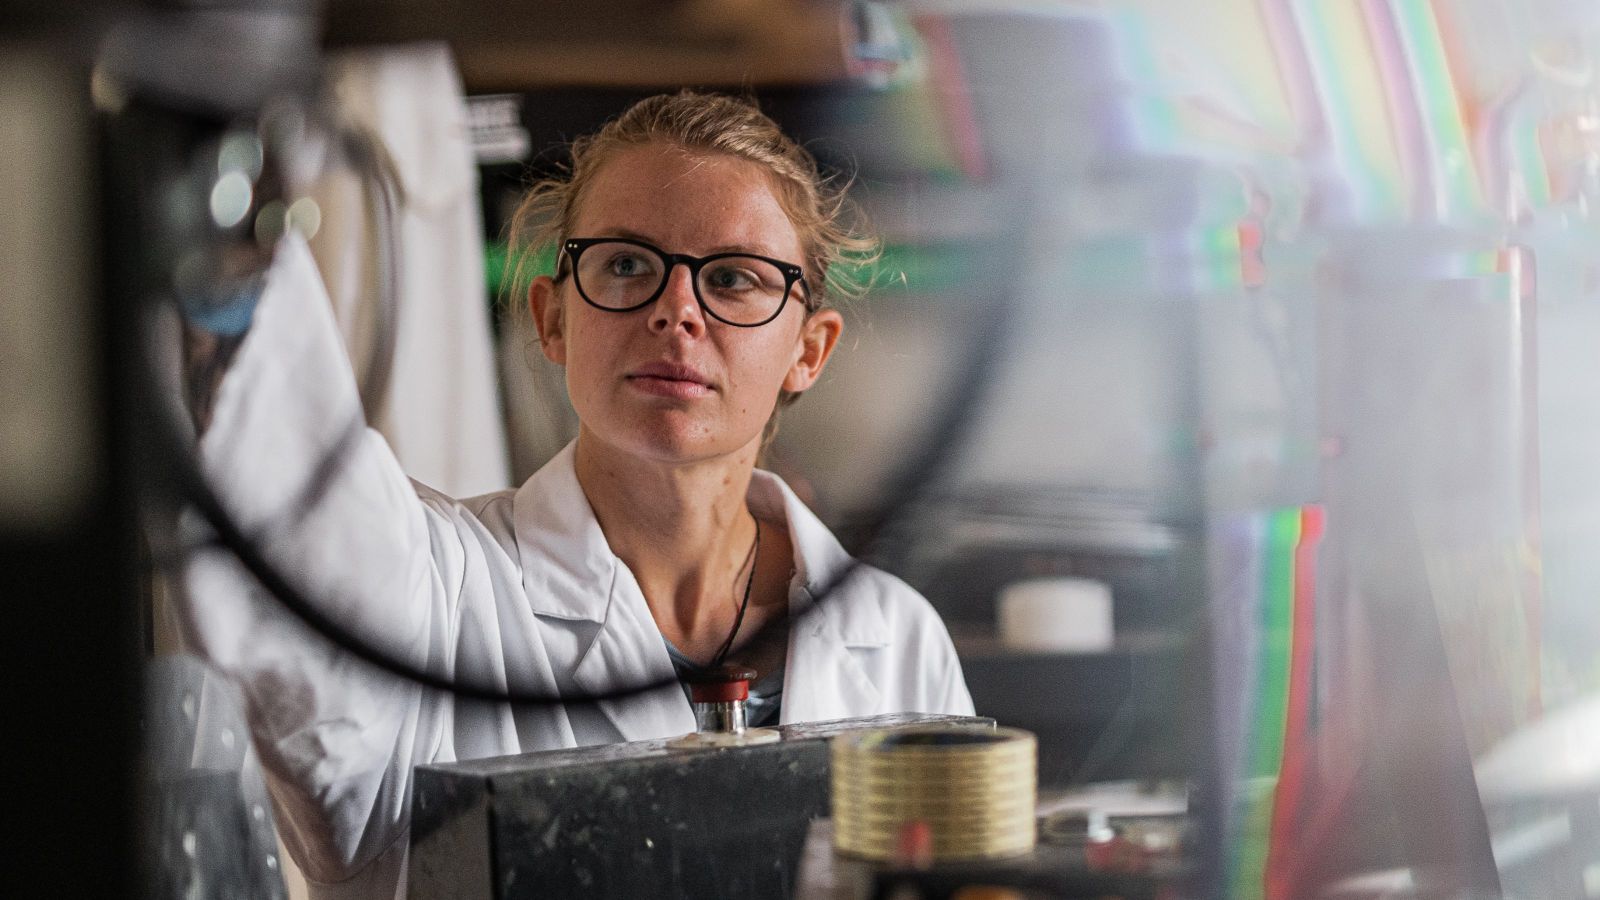 A female scientist wearing a white lab coat viewed through wires and machinery.